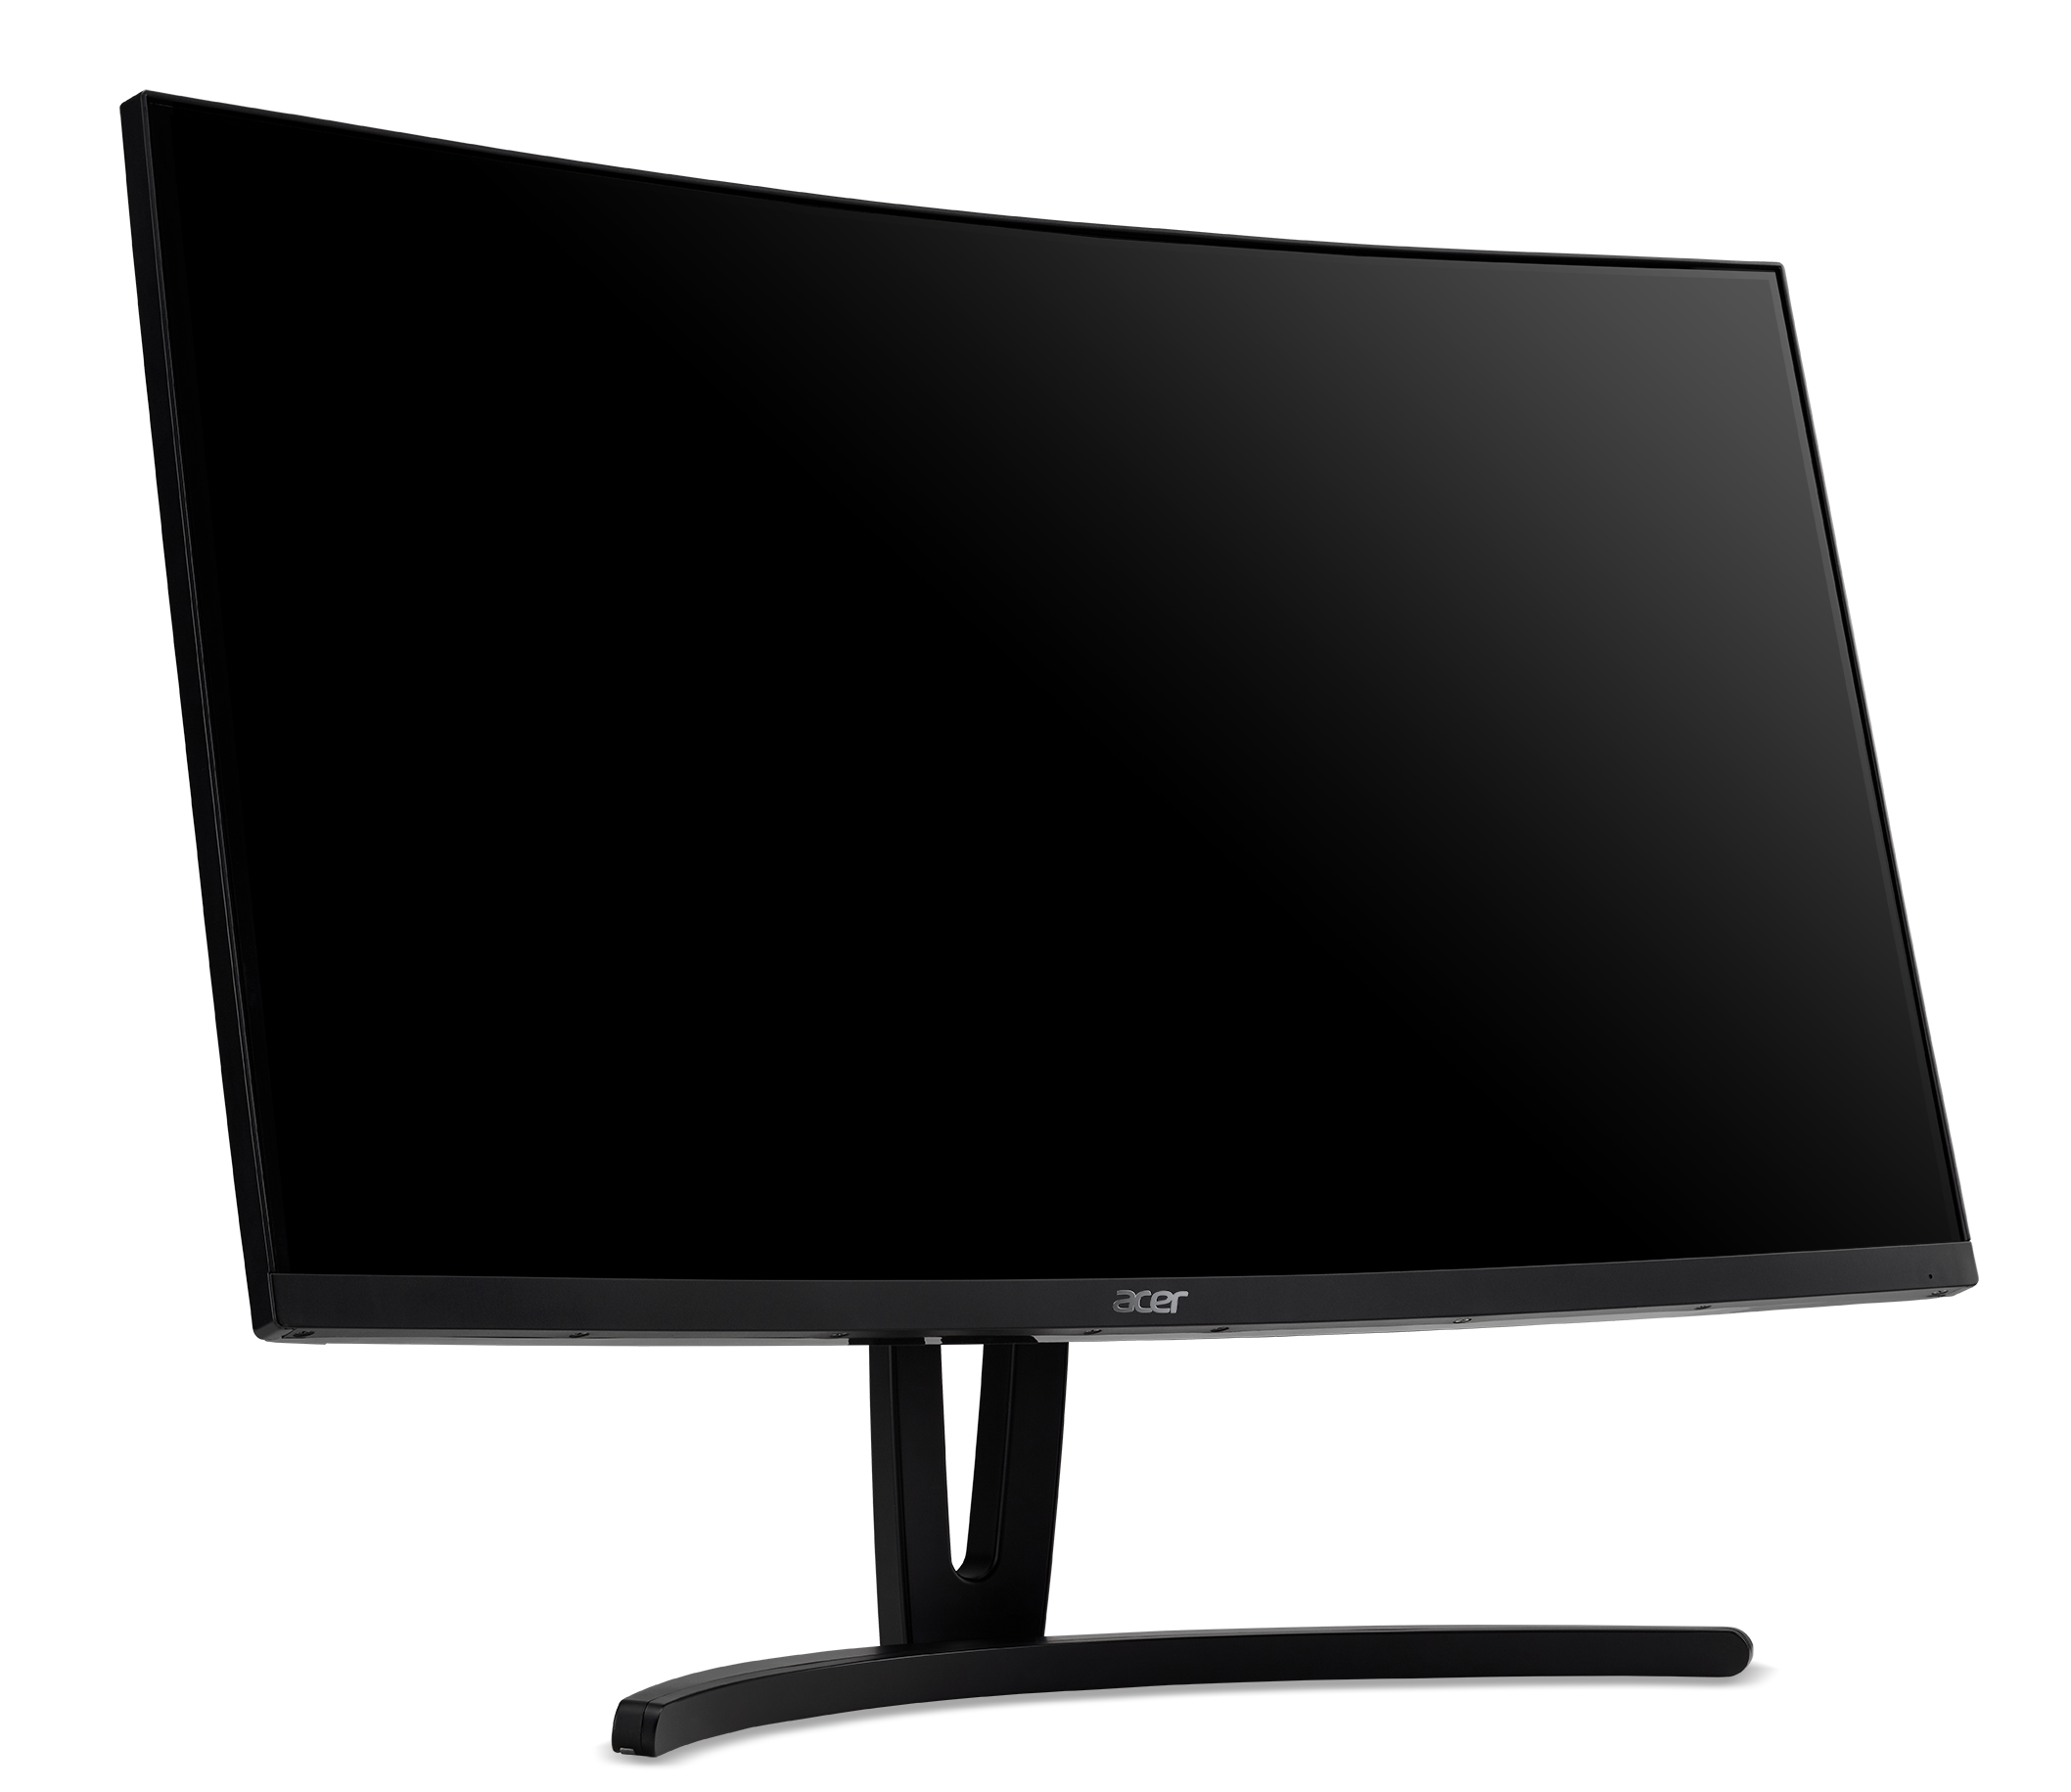 Acer ED273 Bbmiix 27" Curved Full HD (1920 x 1080) Zero Frame Monitor with AMD FreeSync Technology, 75Hz, 1ms VRB - image 3 of 5